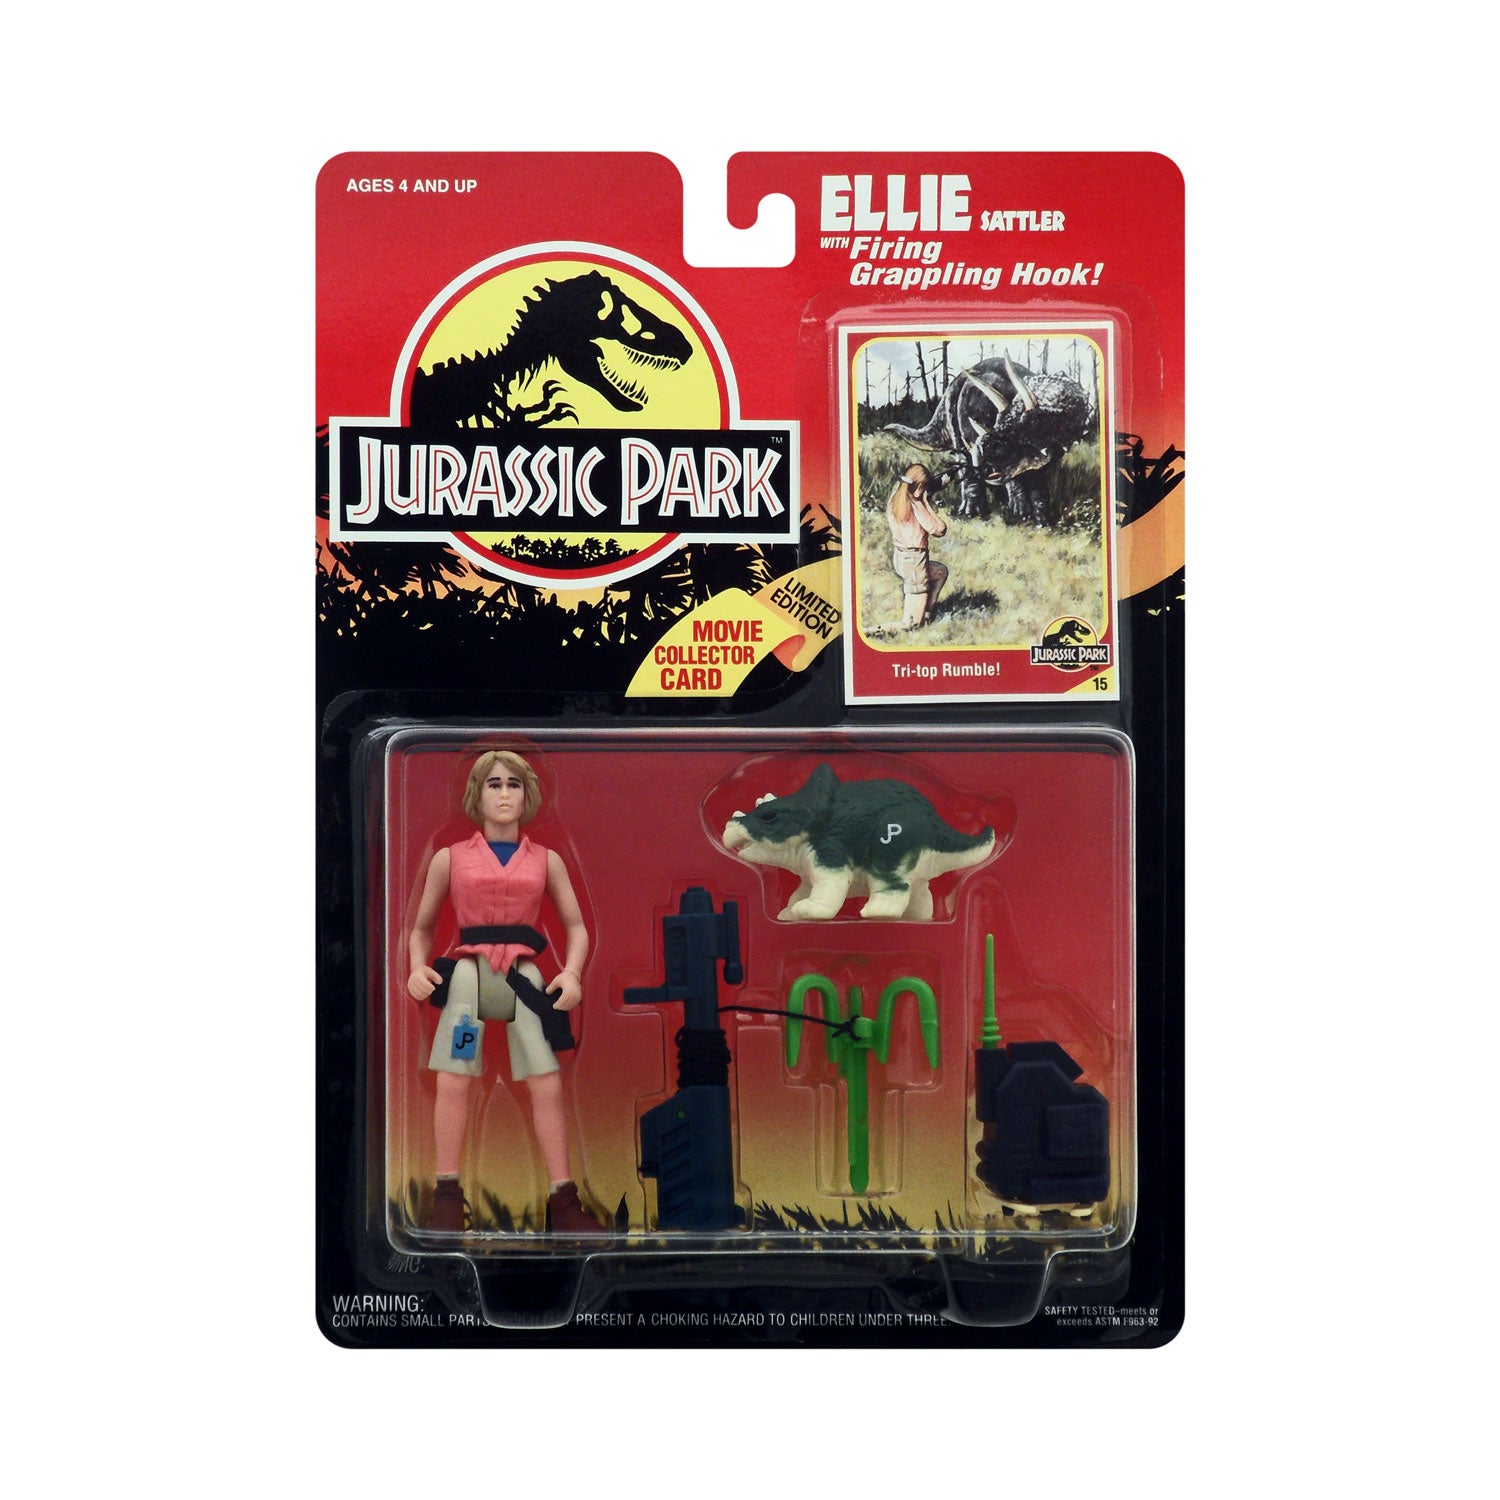 Jurassic Park Series I Ellie Sattler with Firing Grappling Hook Action –  Action Figures and Collectible Toys